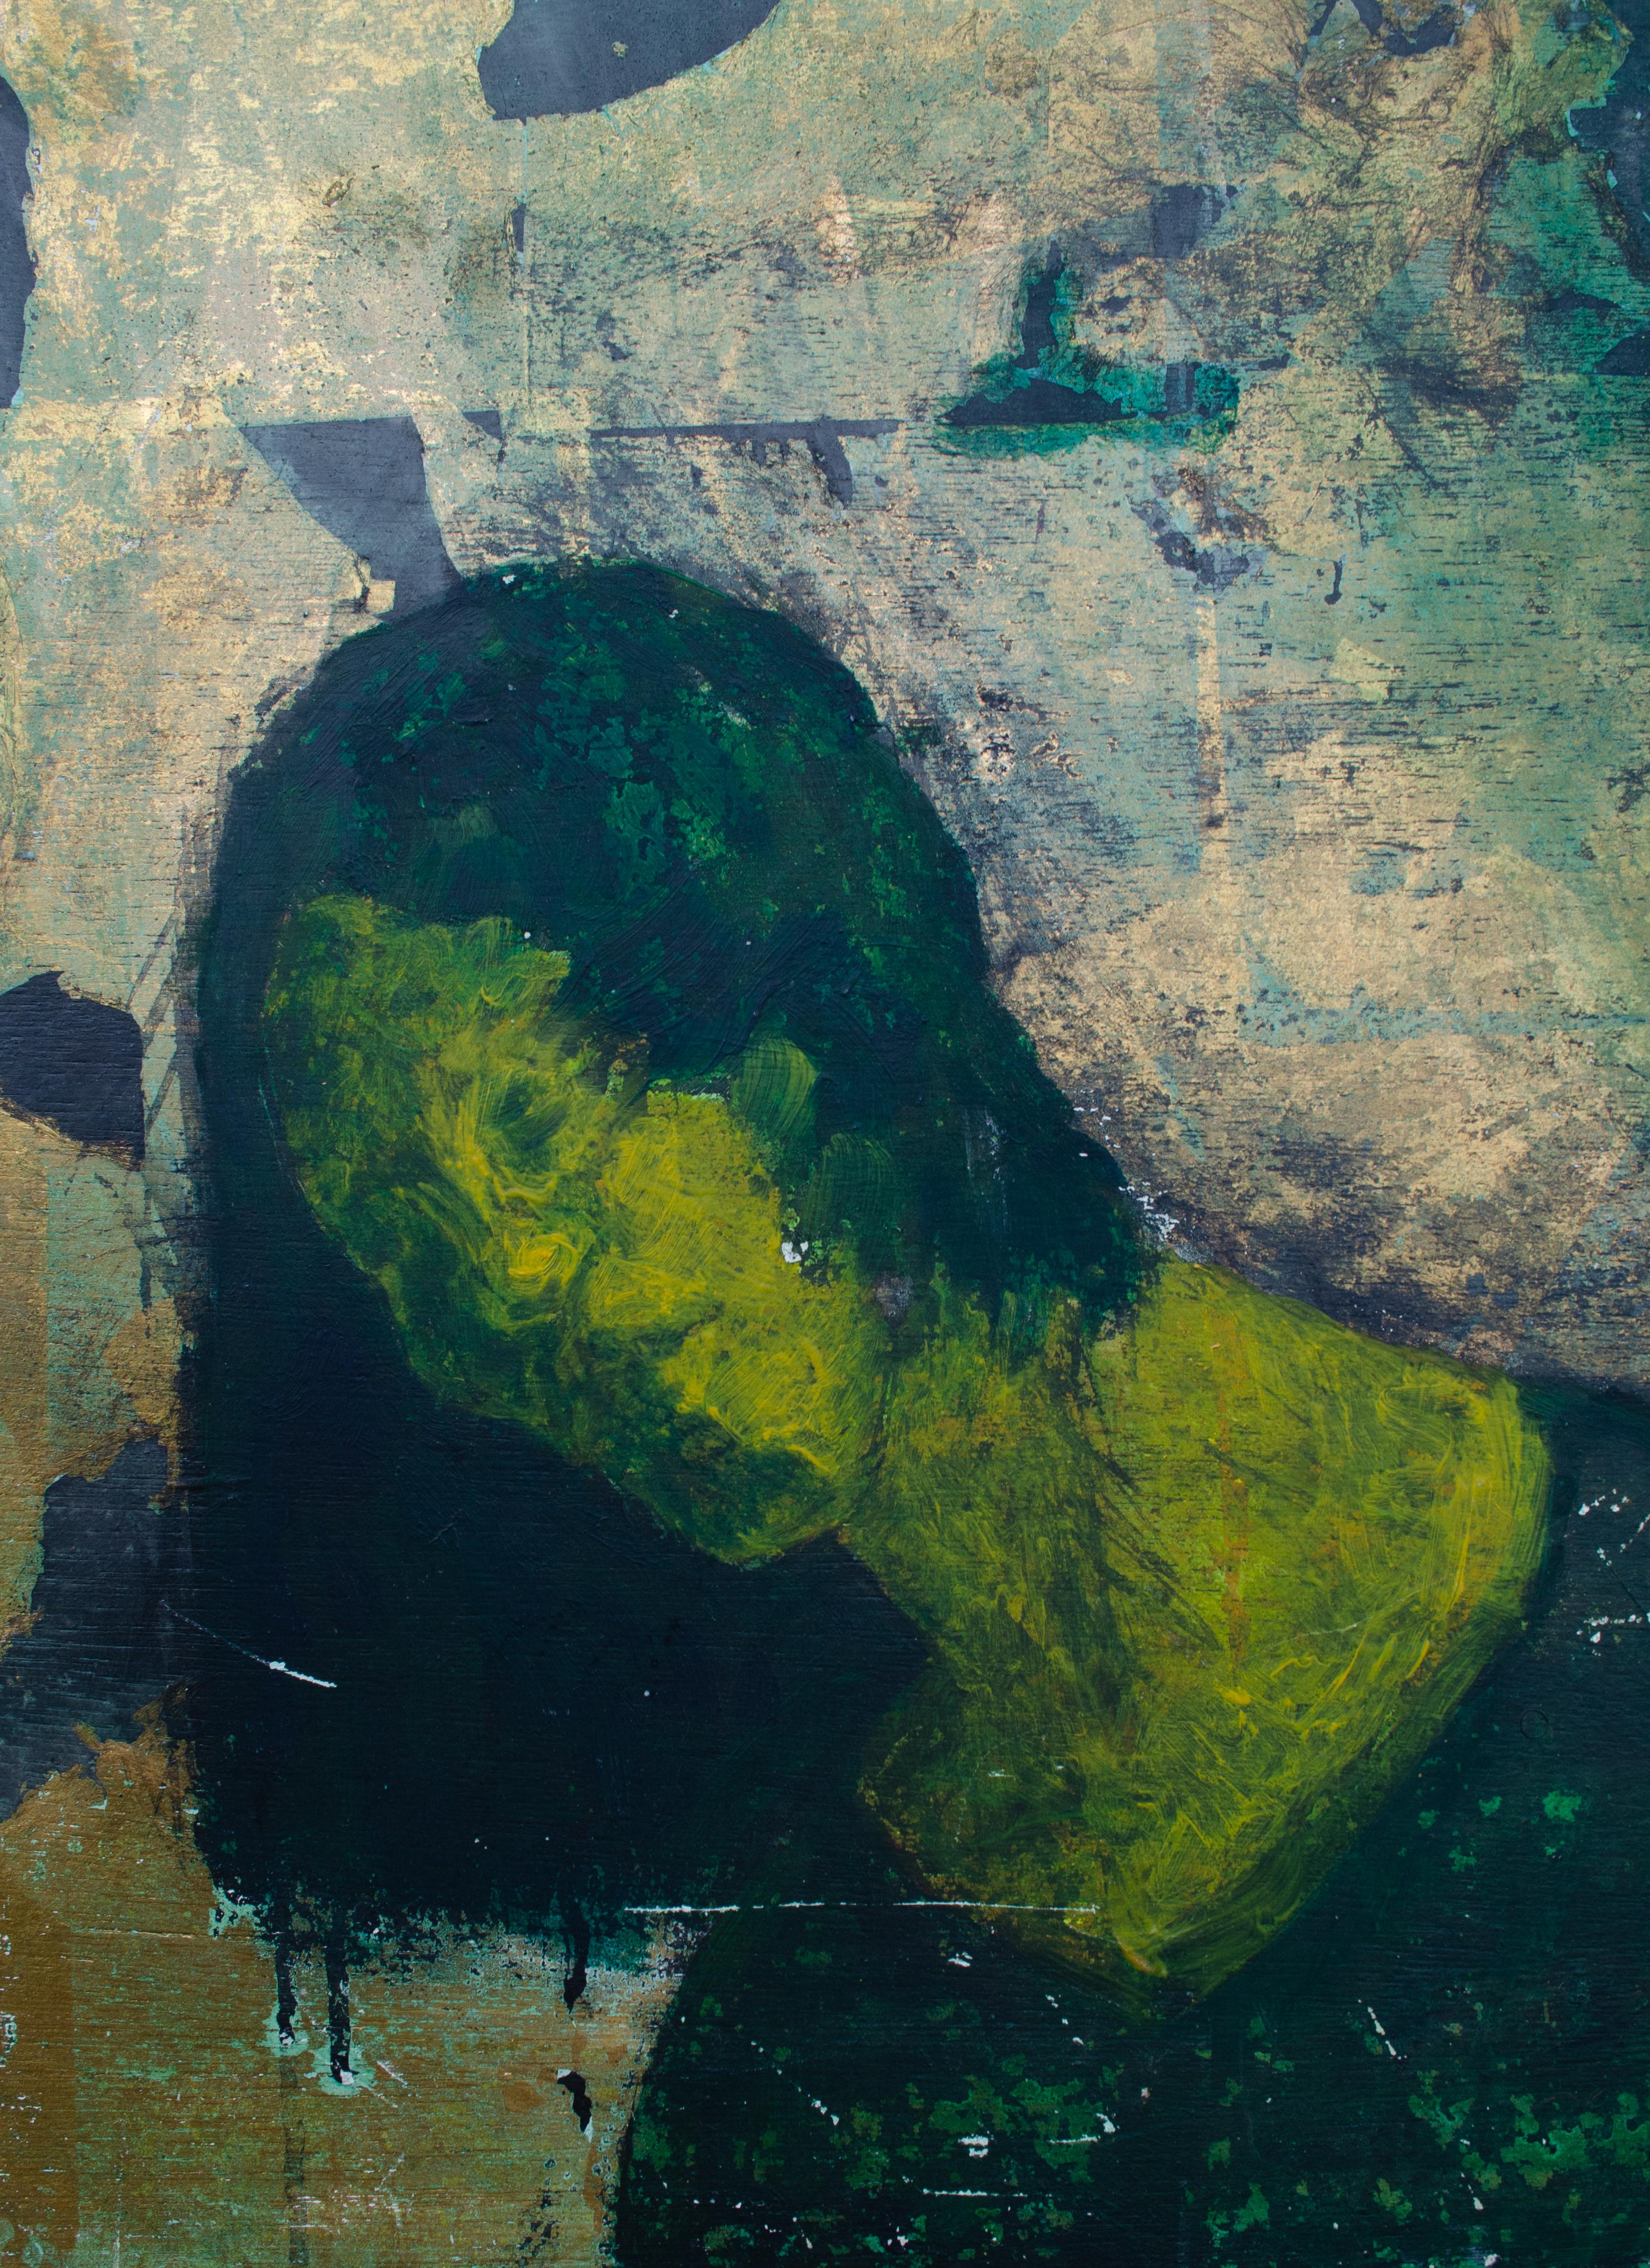 Green Goddess by Mystery Japanese Artist - Contemporary Mixed Media Art by Unknown